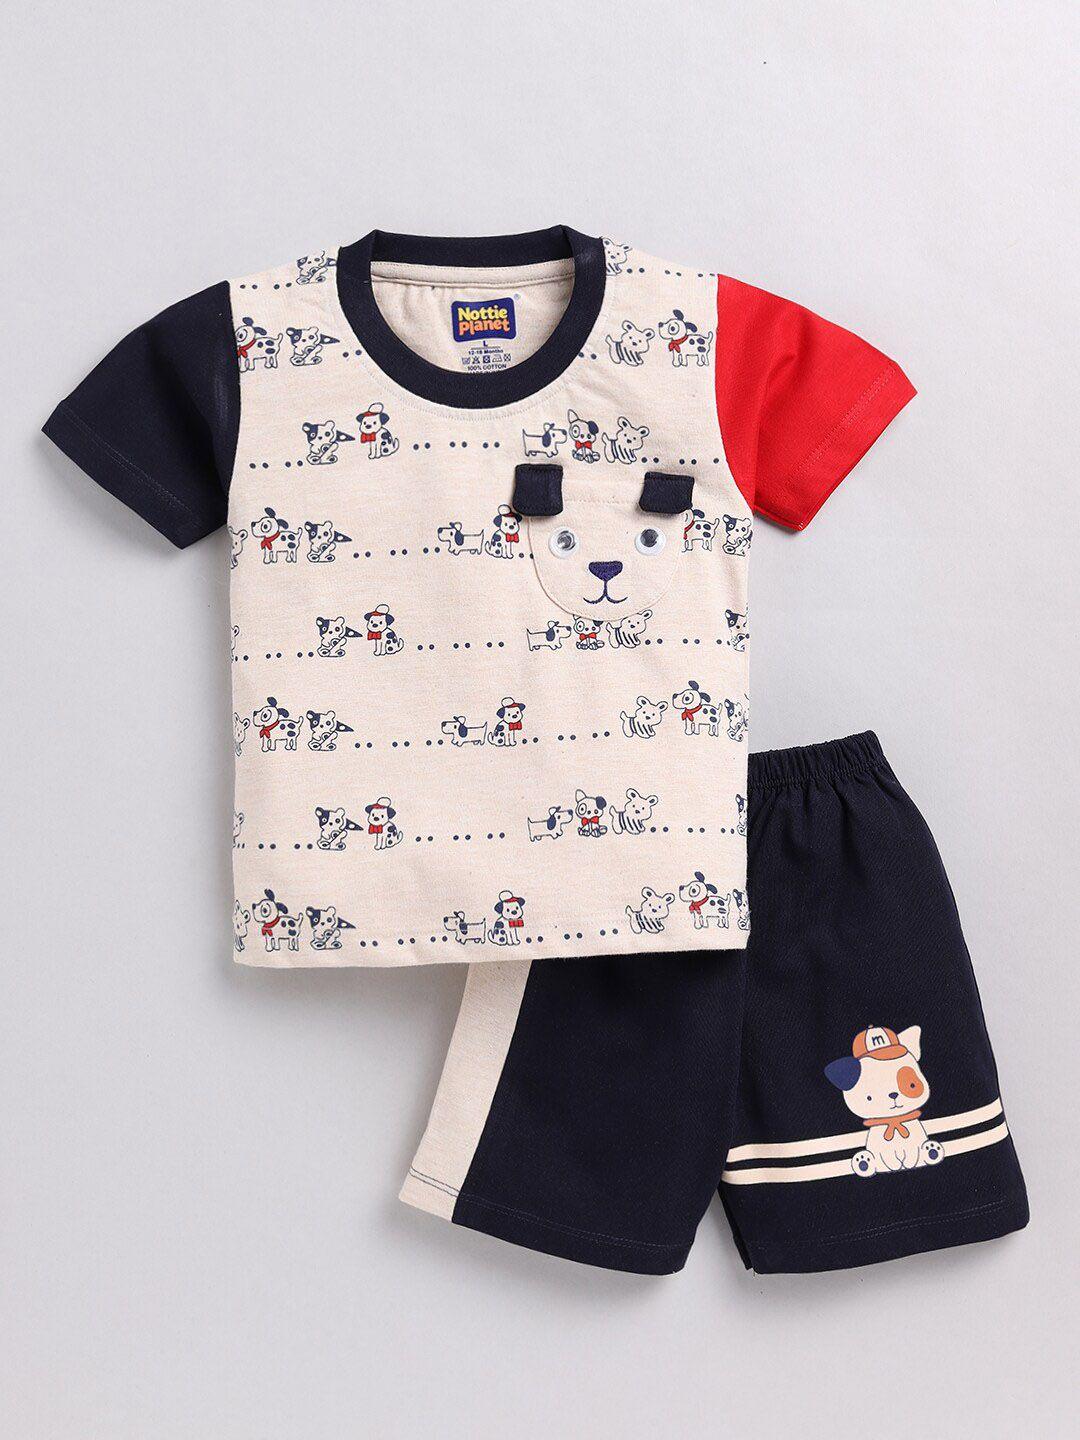 nottie planet cat & dog printed t-shirt with shorts